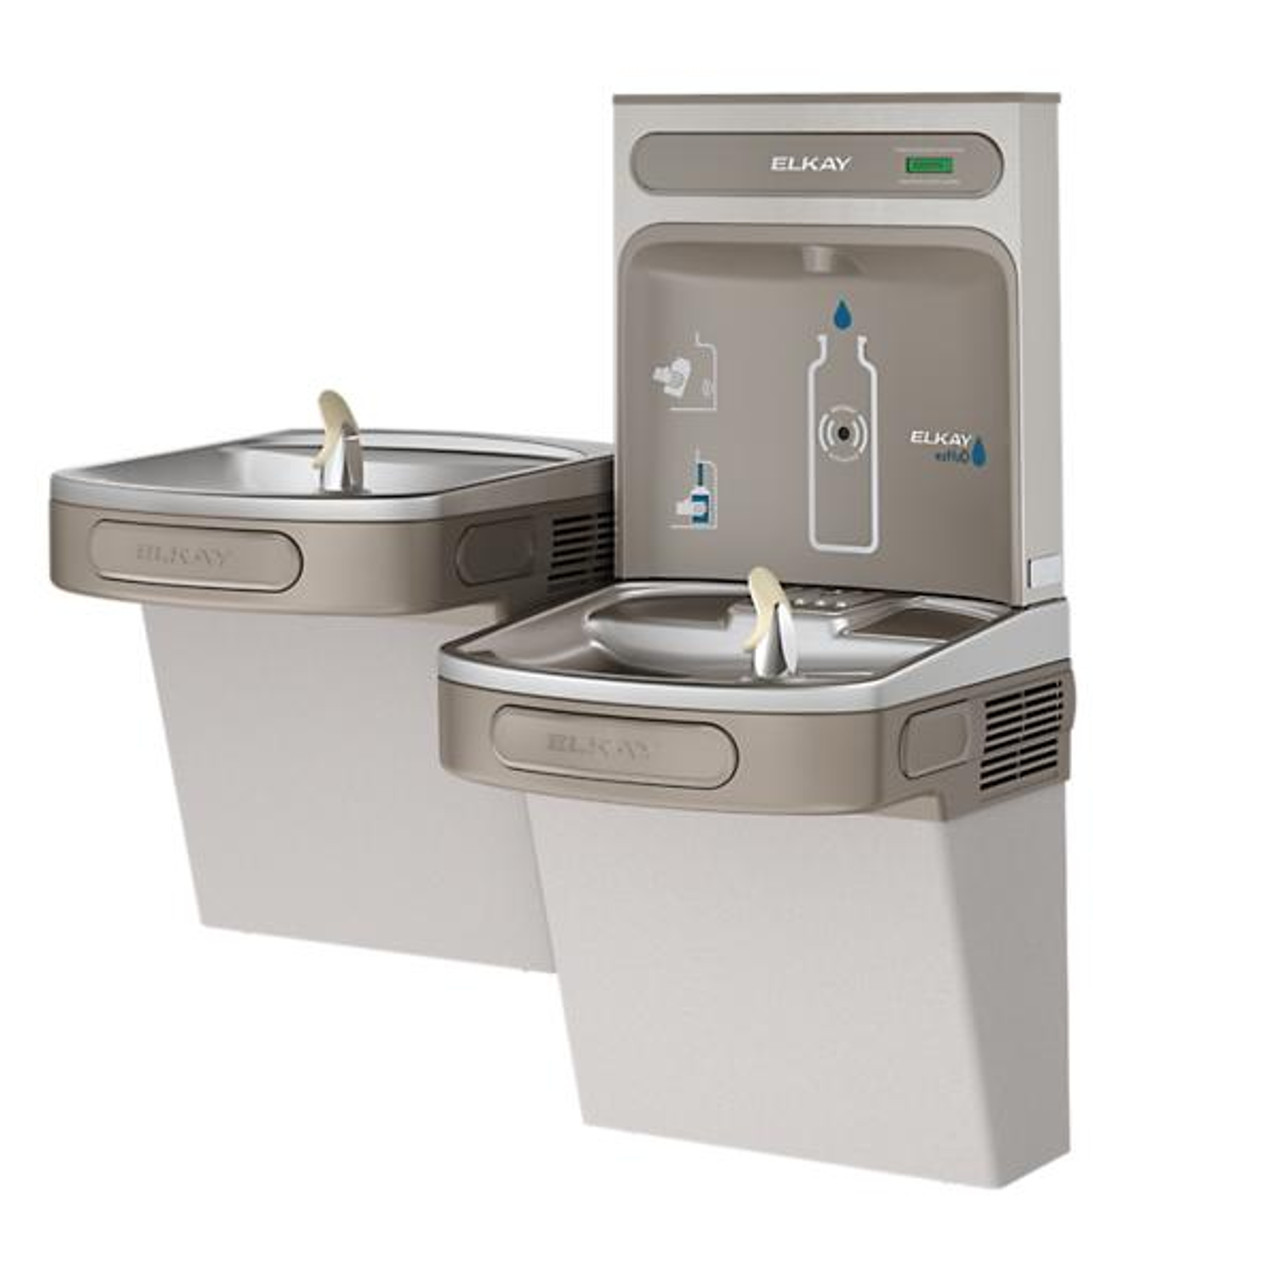 Elkay Wall Mount Bi-Level Drinking Fountain with Bottle Filler - Non-Filtered - Chicken Pieces